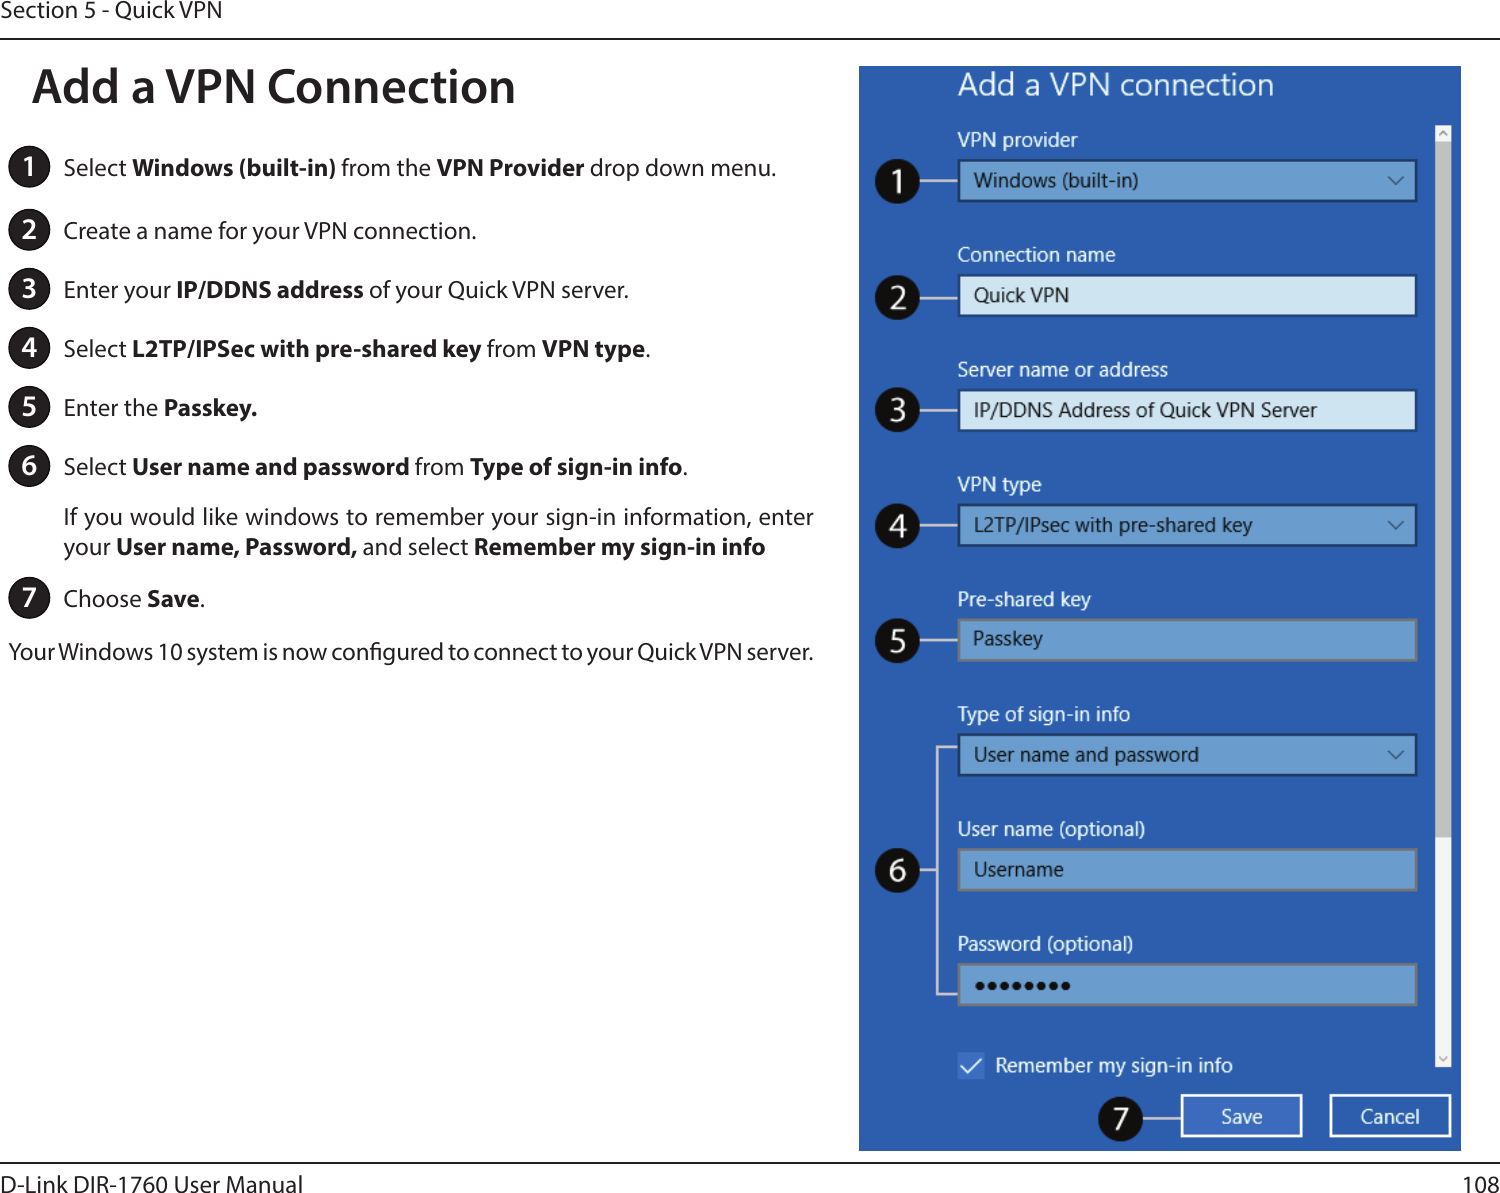 108D-Link DIR-1760 User ManualSection 5 - Quick VPN1Select Windows (built-in) from the VPN Provider drop down menu.2Create a name for your VPN connection.3Enter your IP/DDNS address of your Quick VPN server.4Select L2TP/IPSec with pre-shared key from VPN type.5Enter the Passkey.6Select User name and password from Type of sign-in info.If you would like windows to remember your sign-in information, enter your User name, Password, and select Remember my sign-in info7Choose Save.Your Windows 10 system is now congured to connect to your Quick VPN server.Add a VPN Connection